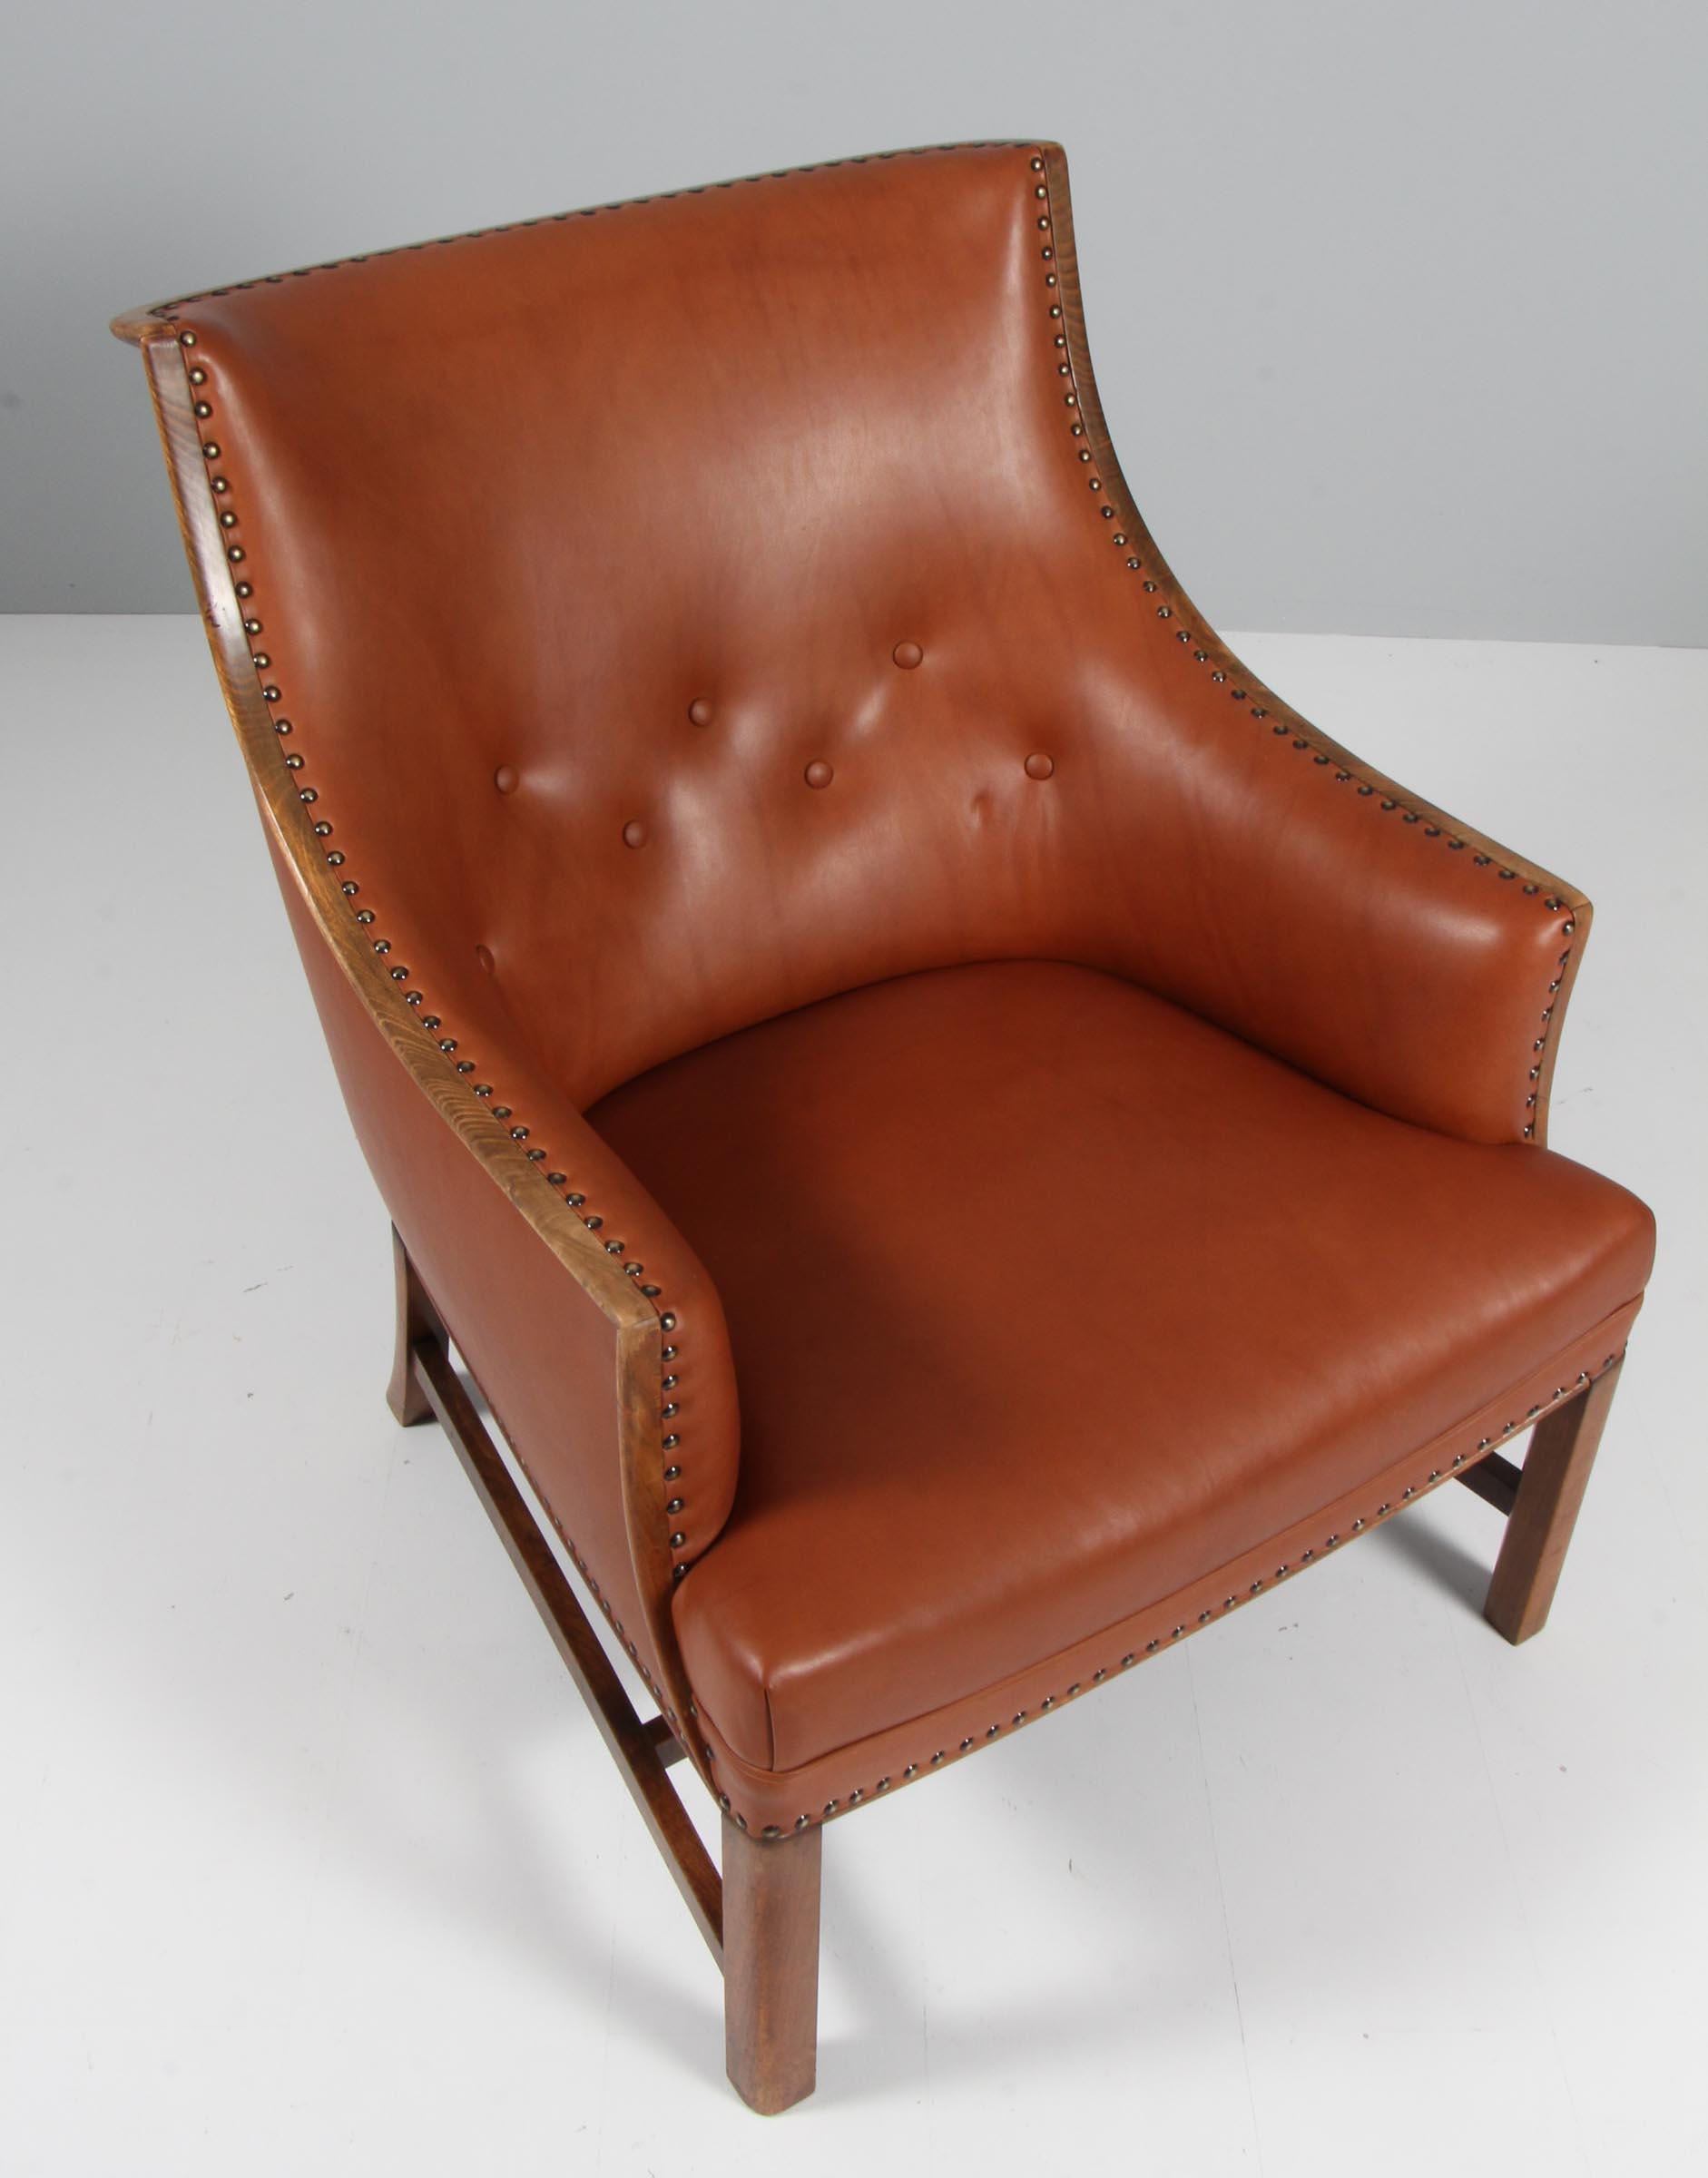 Frits Henningsen lounge chair new upholstered with brandy coloured aniline leather.

Frame of mahogany. 

Made in the 1940s.